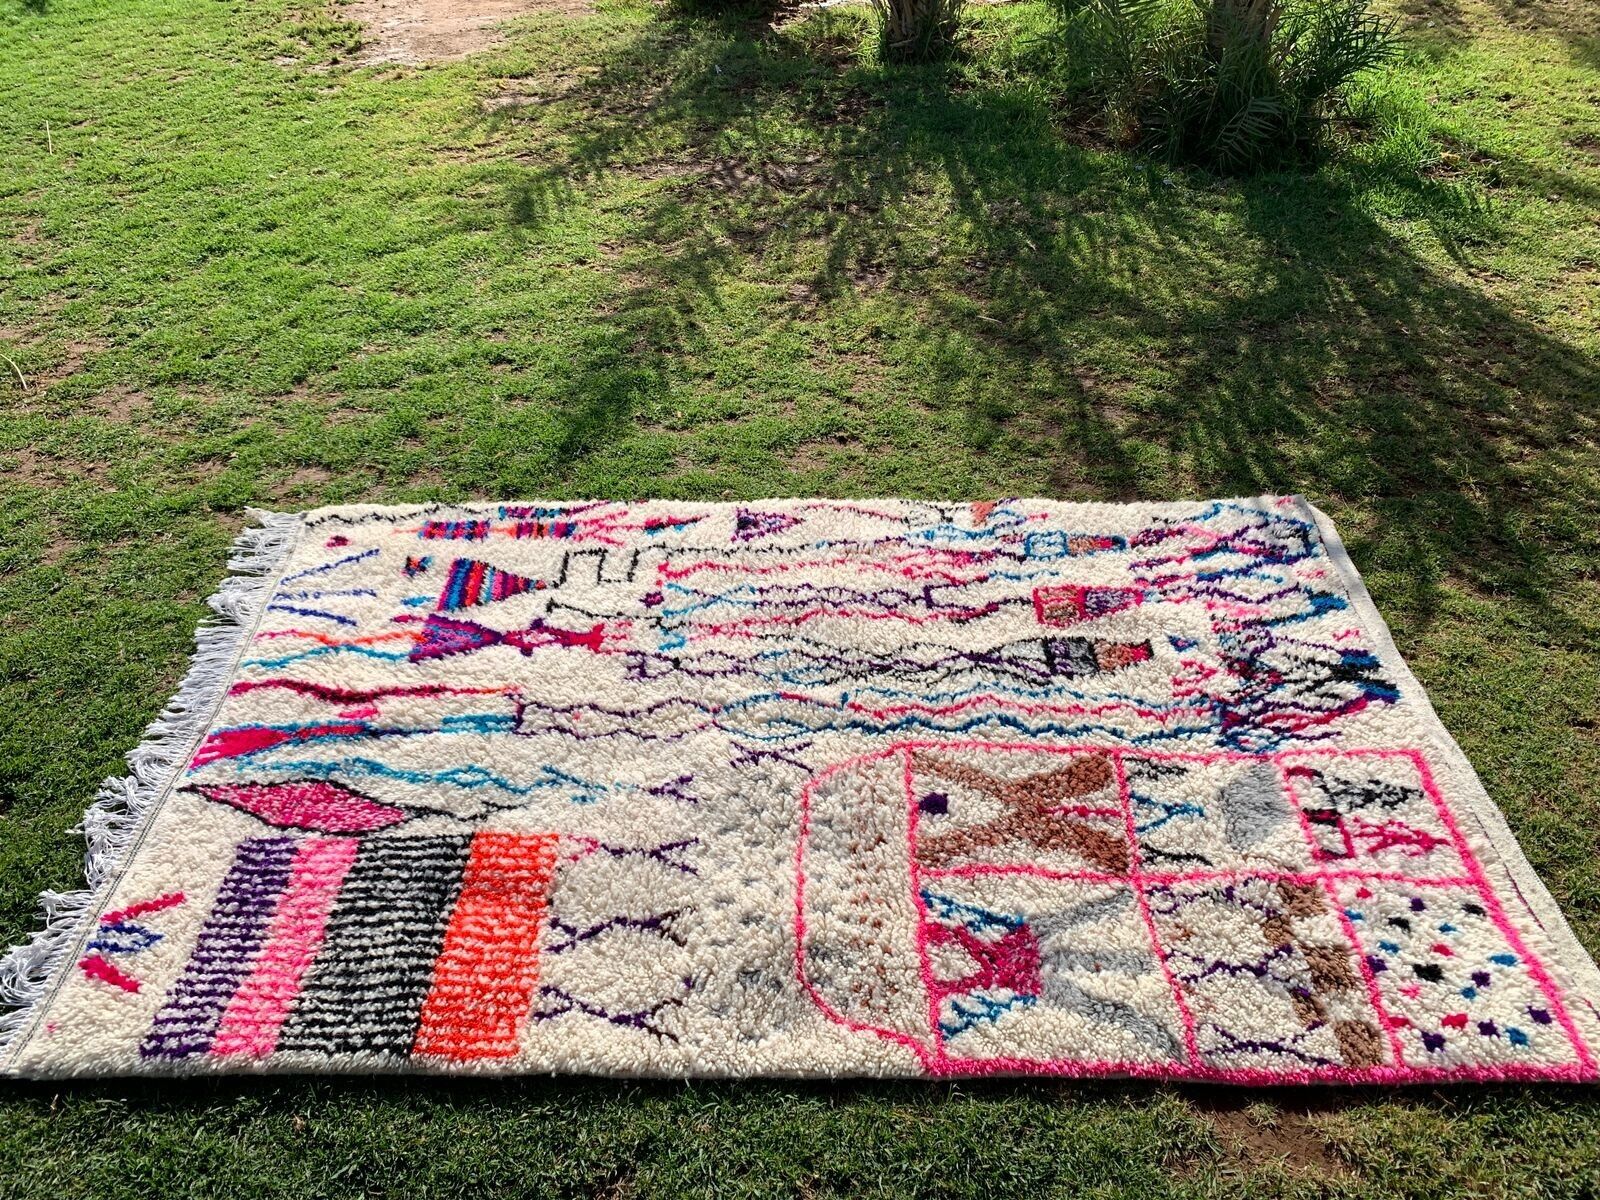 Close-up of the rug's contemporary design and traditional Berber elements, reflecting Moroccan craftsmanship